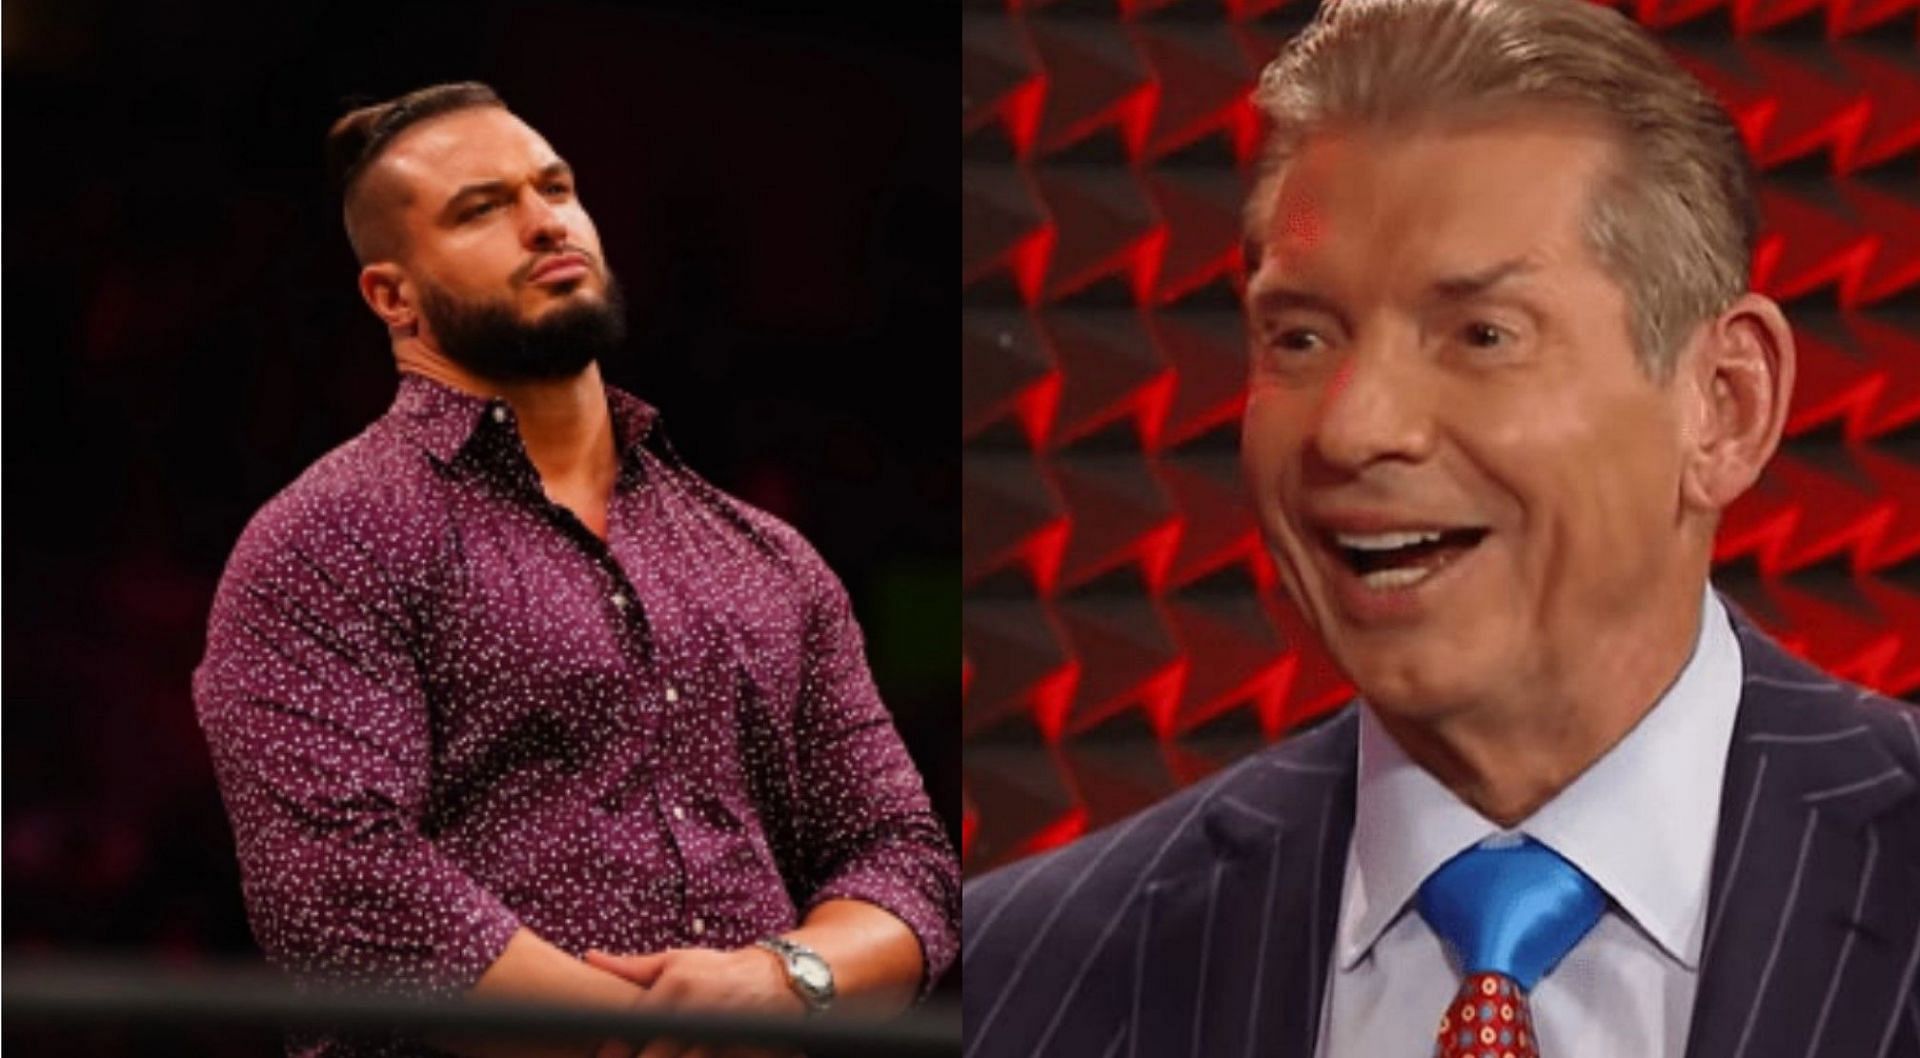 Wardlow (left) and Vince McMahon (right)